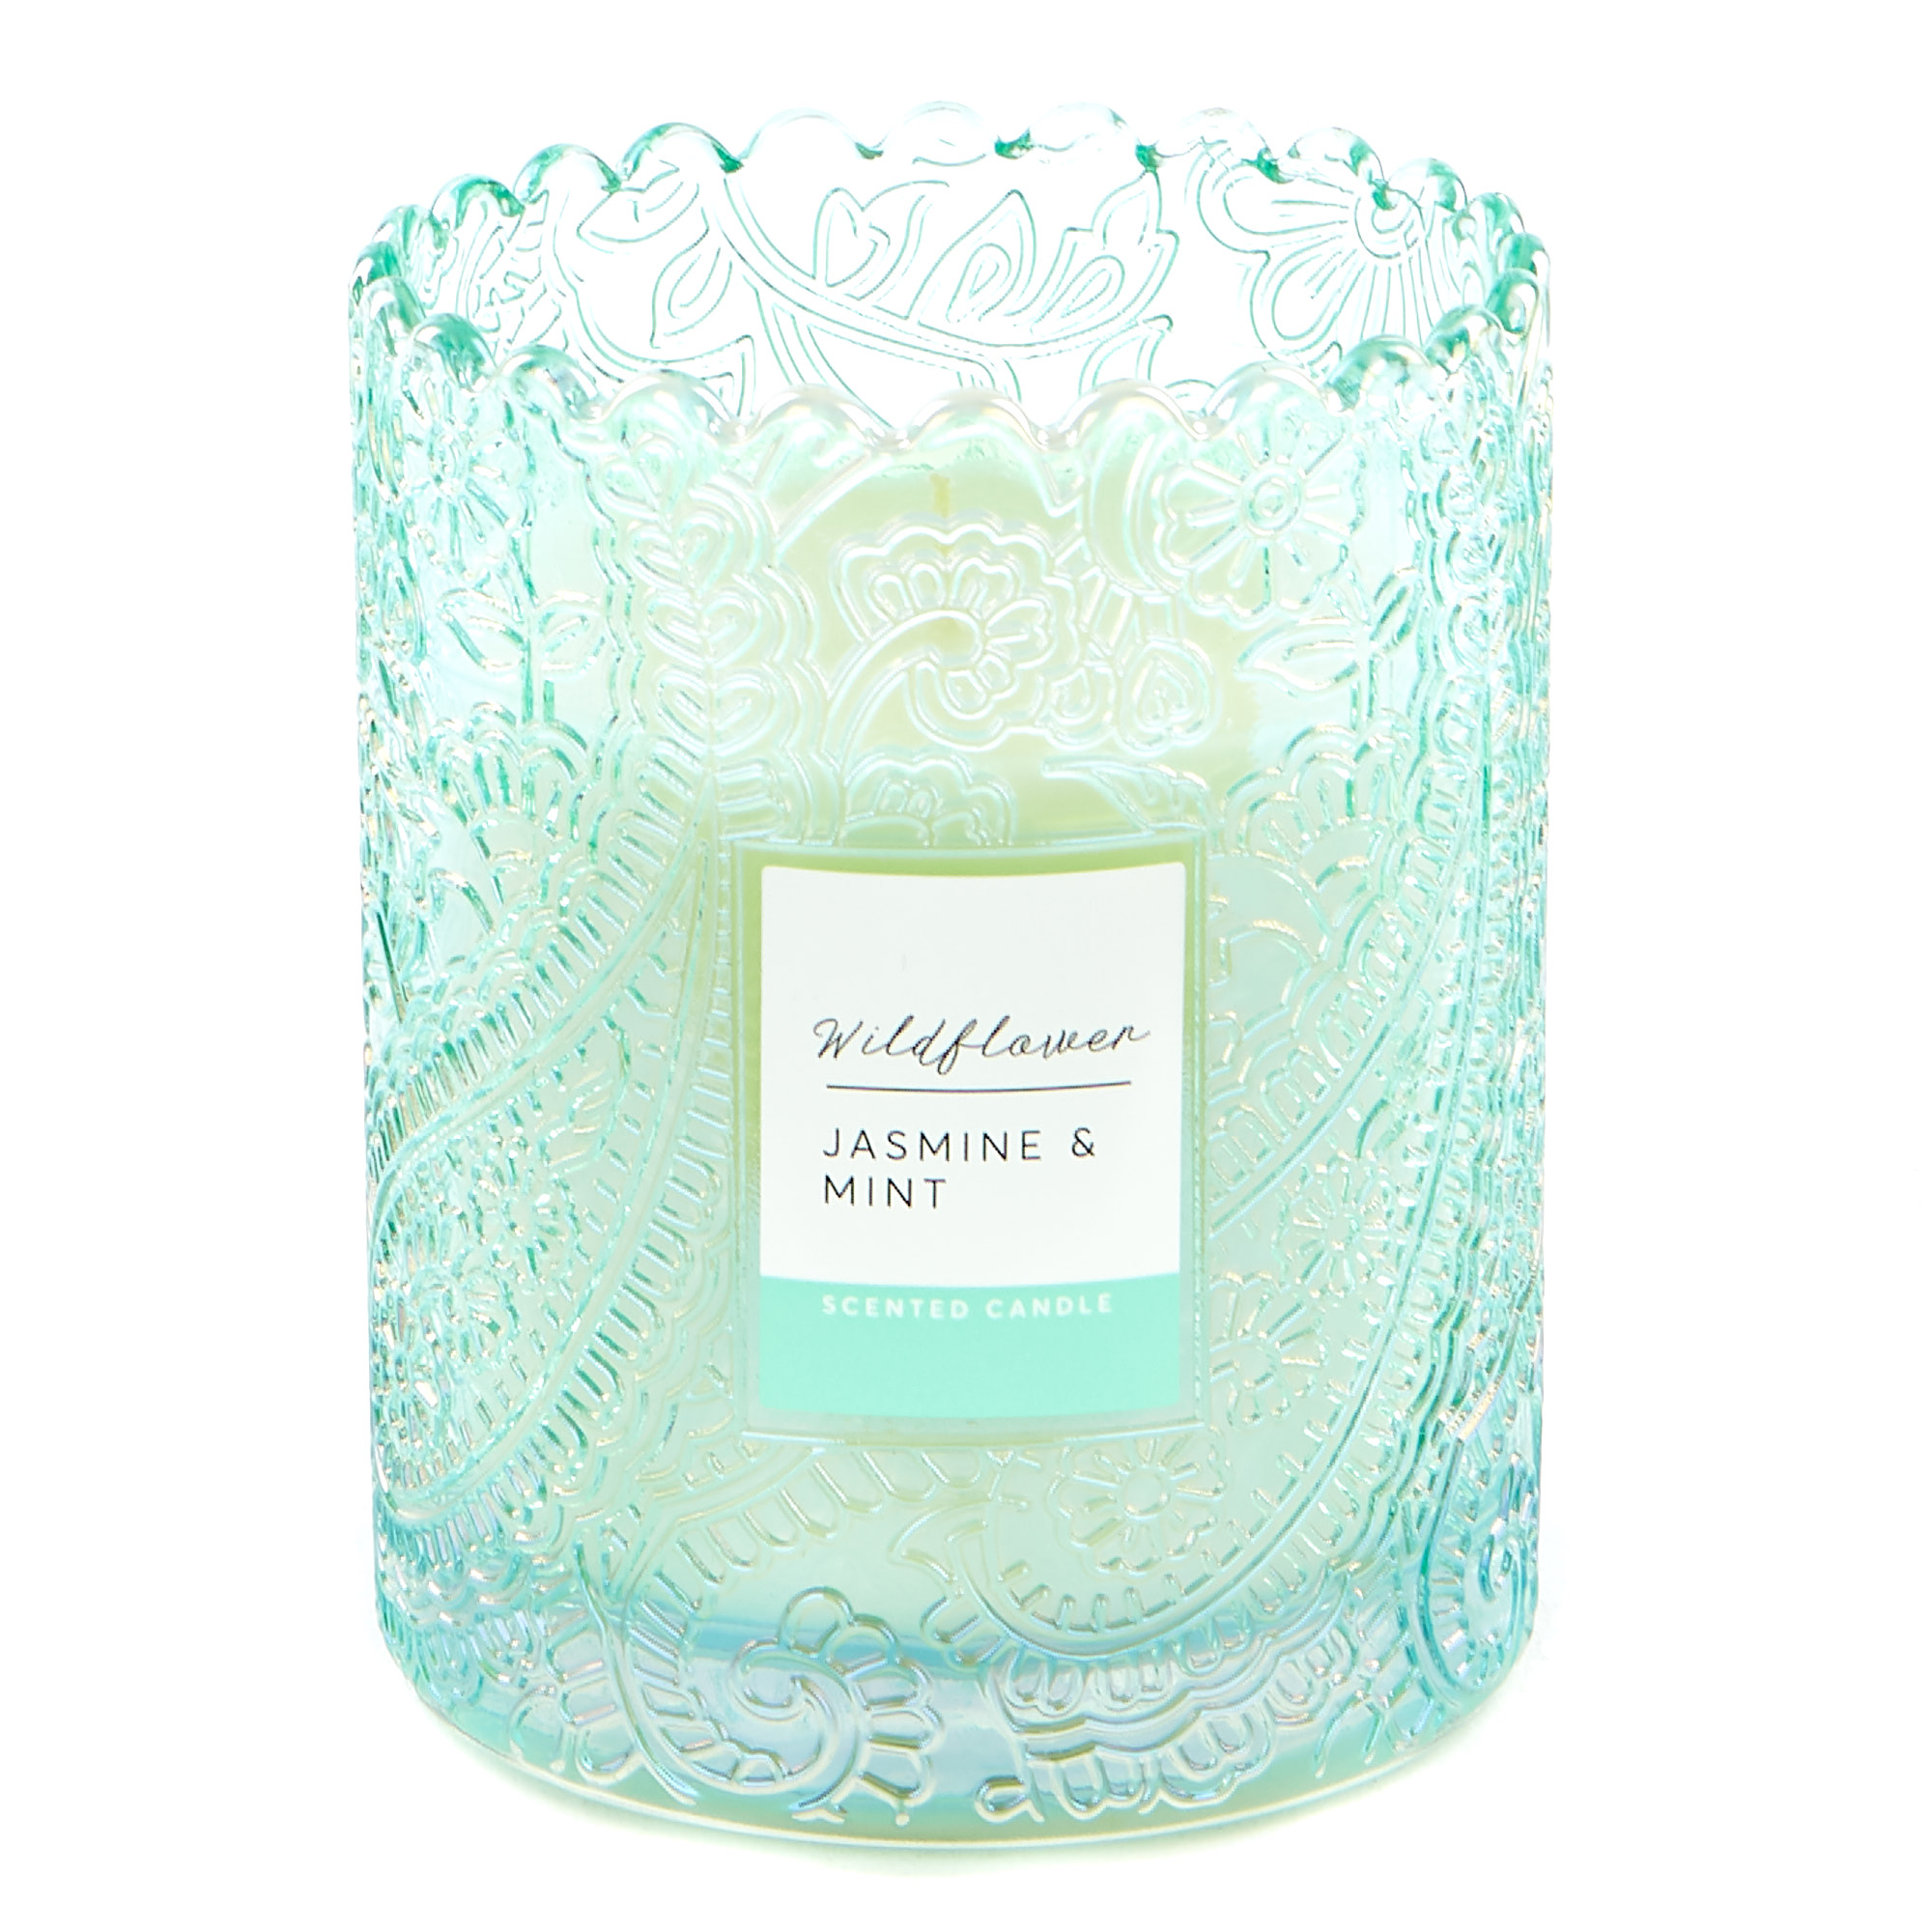 Wildflower Jasmine & Mint Scented Candle